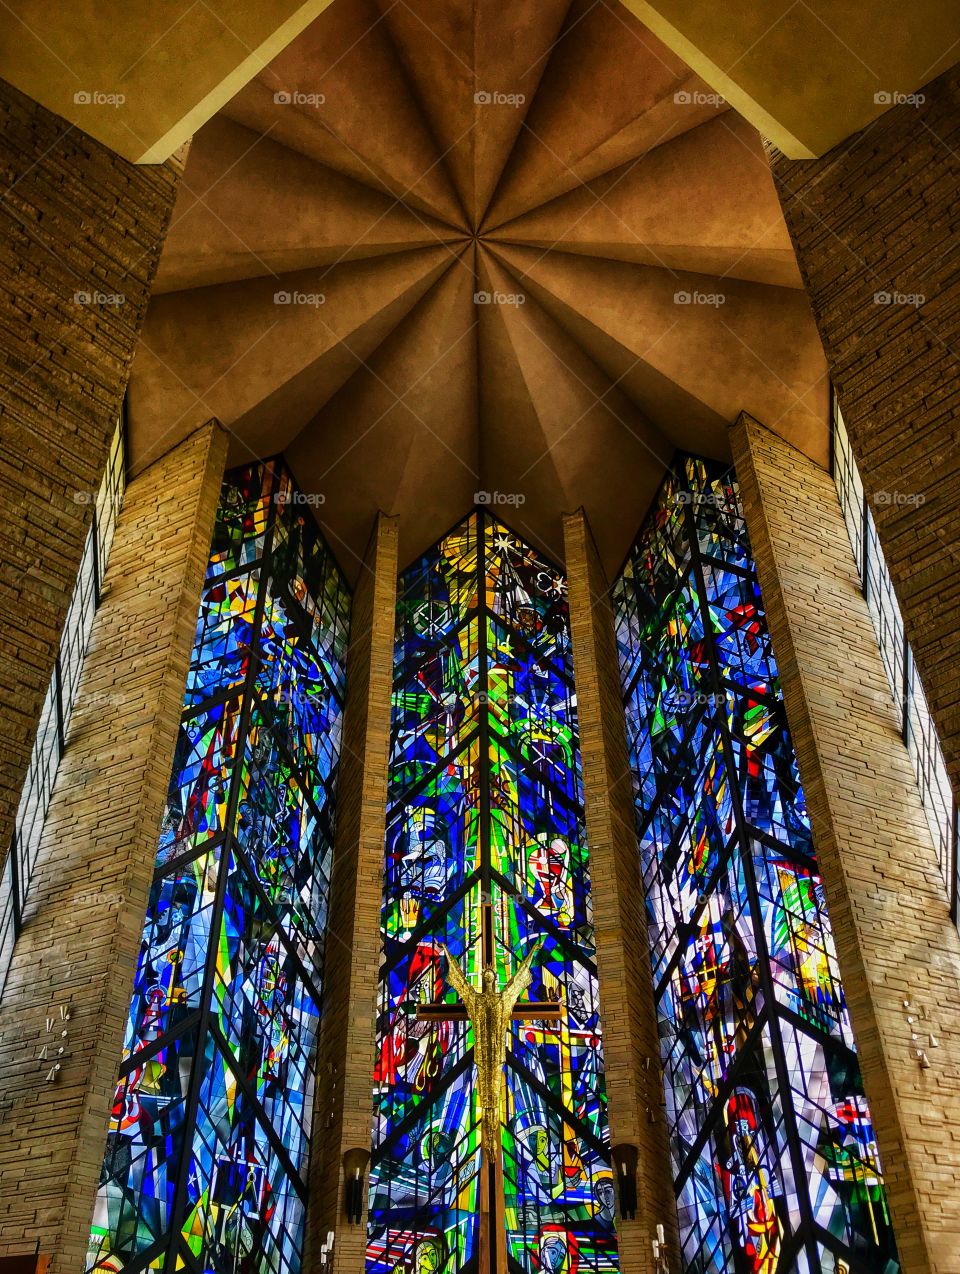 Stained glass windows inside of the Chapel of the Resurrection at Valparaiso University—taken in Valparaiso, Indiana 